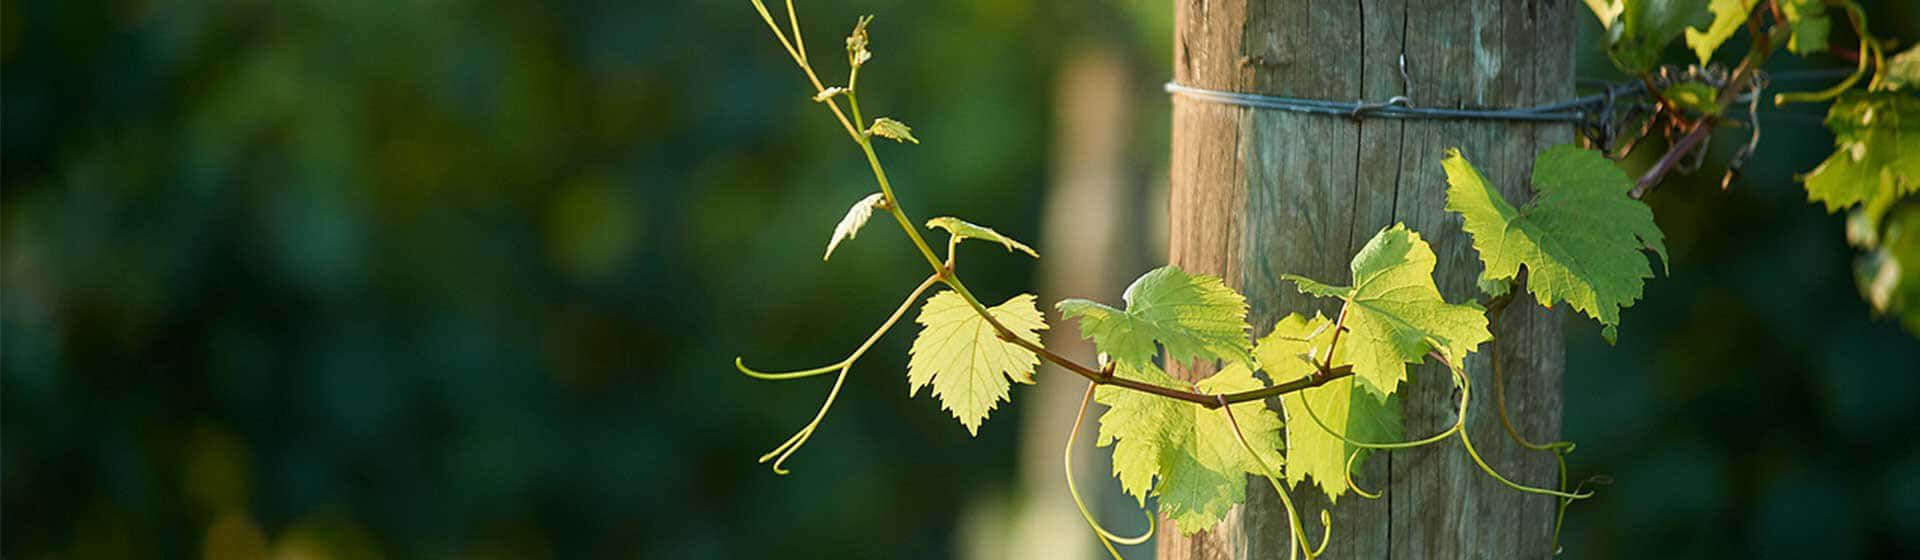 A close-up of a single cabernet vine in the Barossa Valley